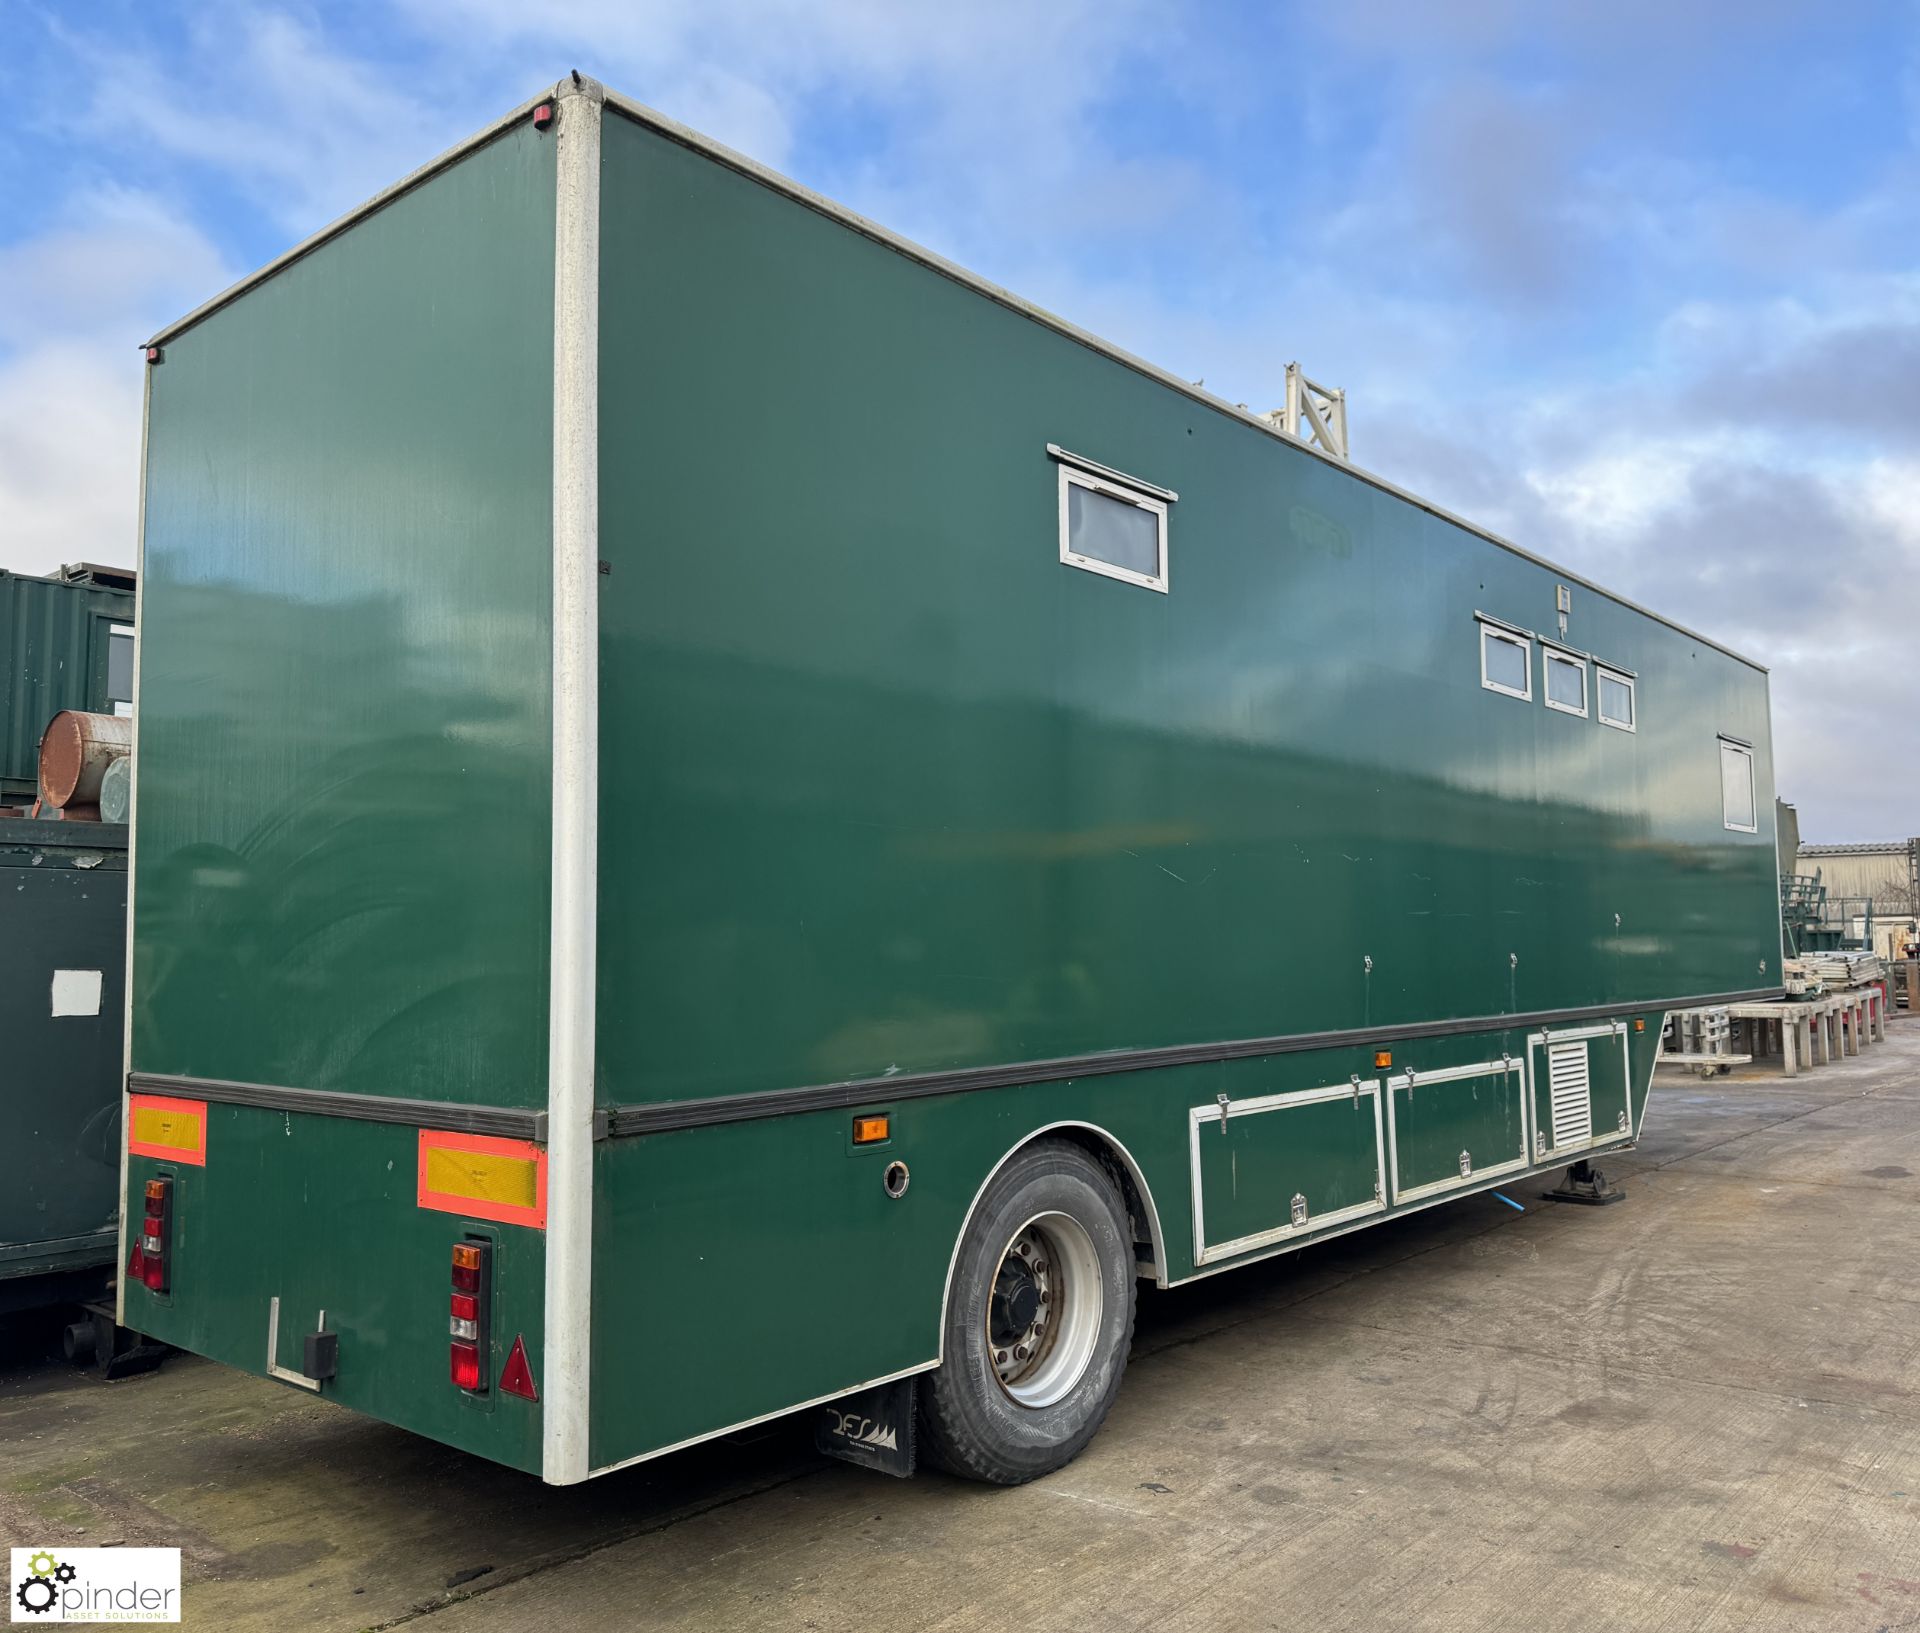 Trailer type Accommodation Unit, comprising office 3000mm x 2450mm, with window door, plug points, - Image 5 of 33